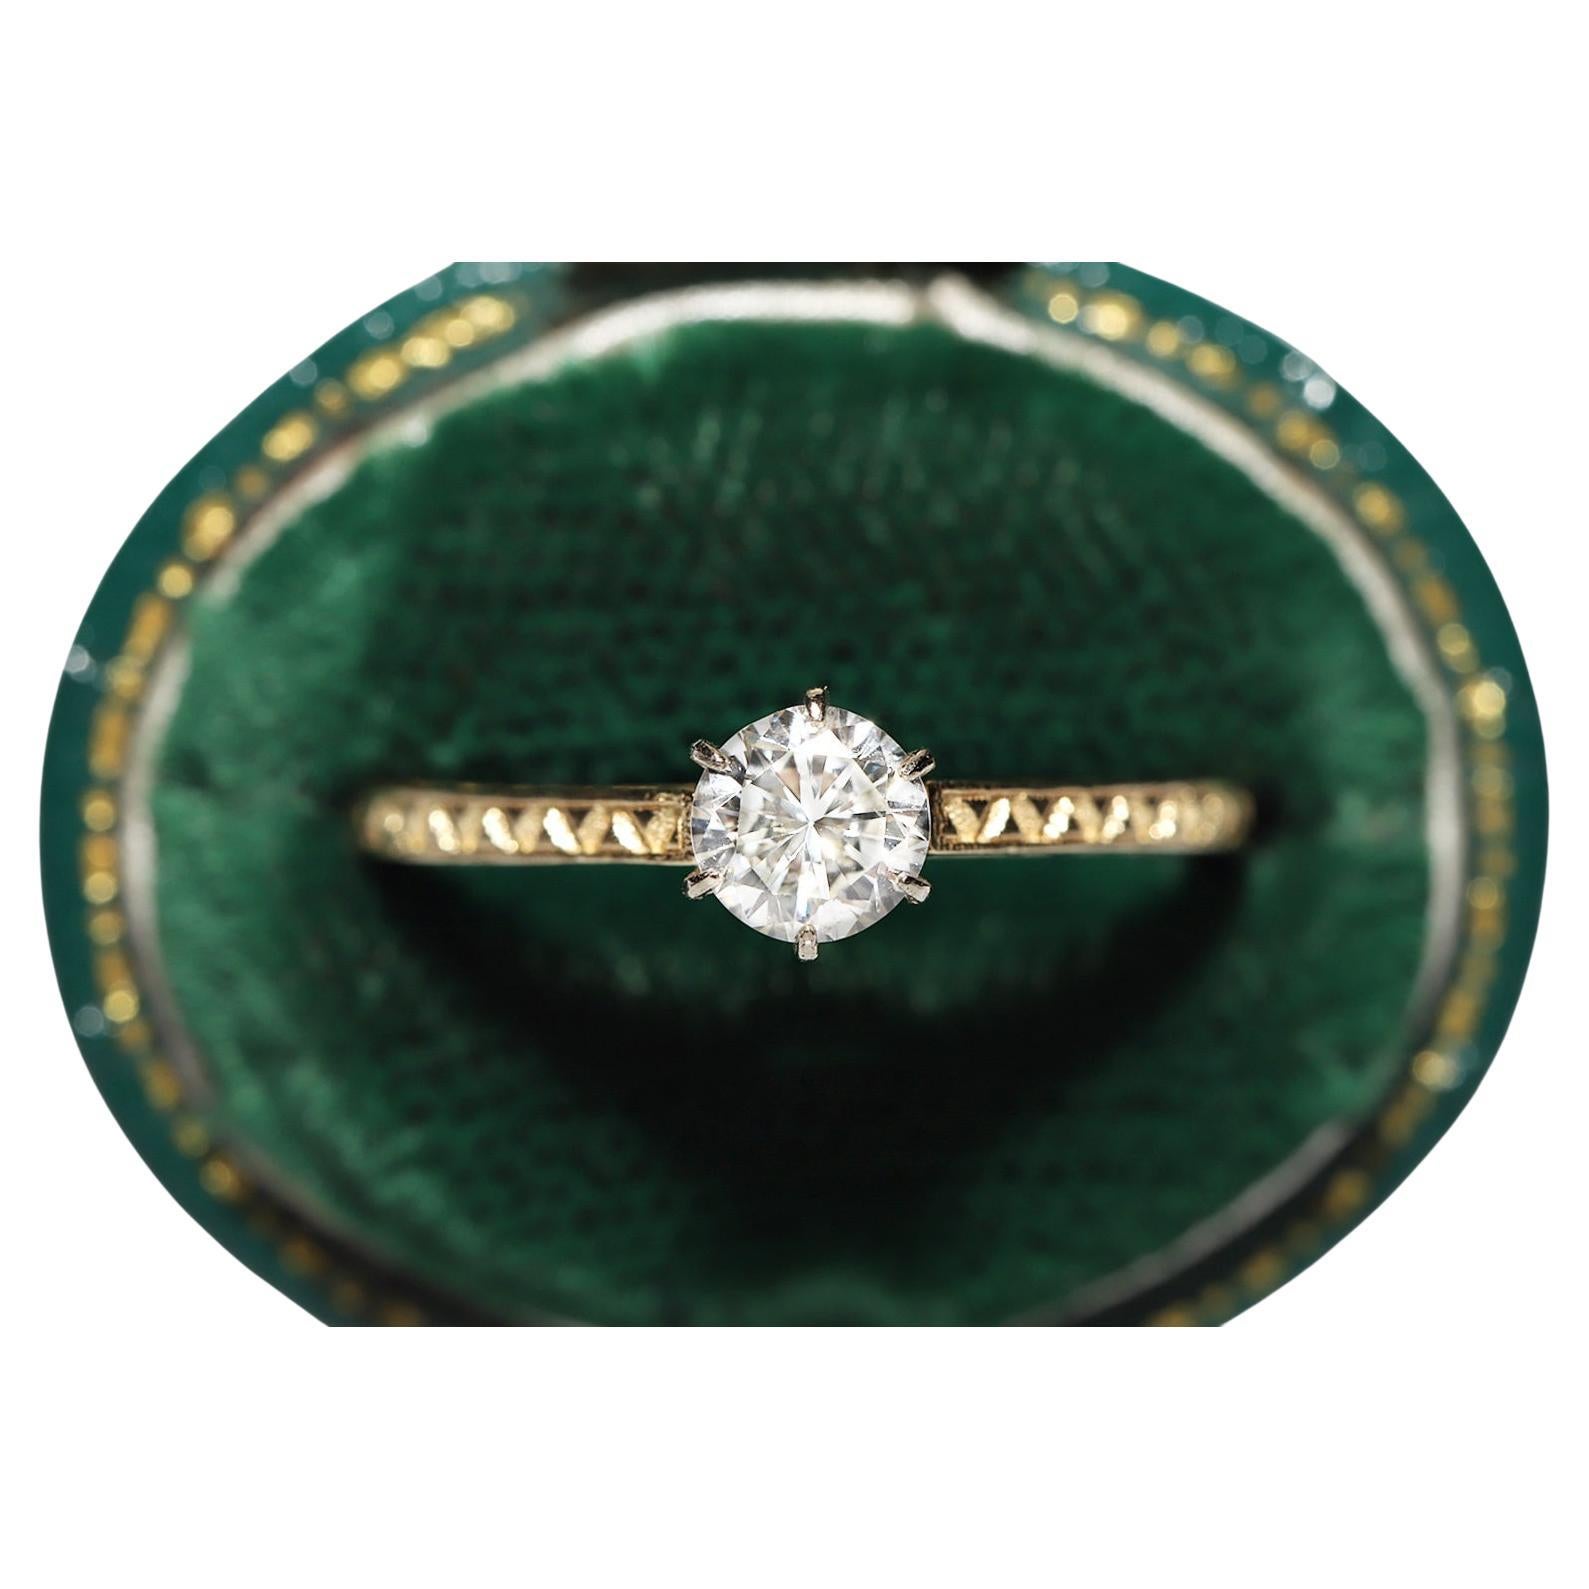 New Made 18k Gold Natural Old Cut Diamond Decorated Solitaire Ring